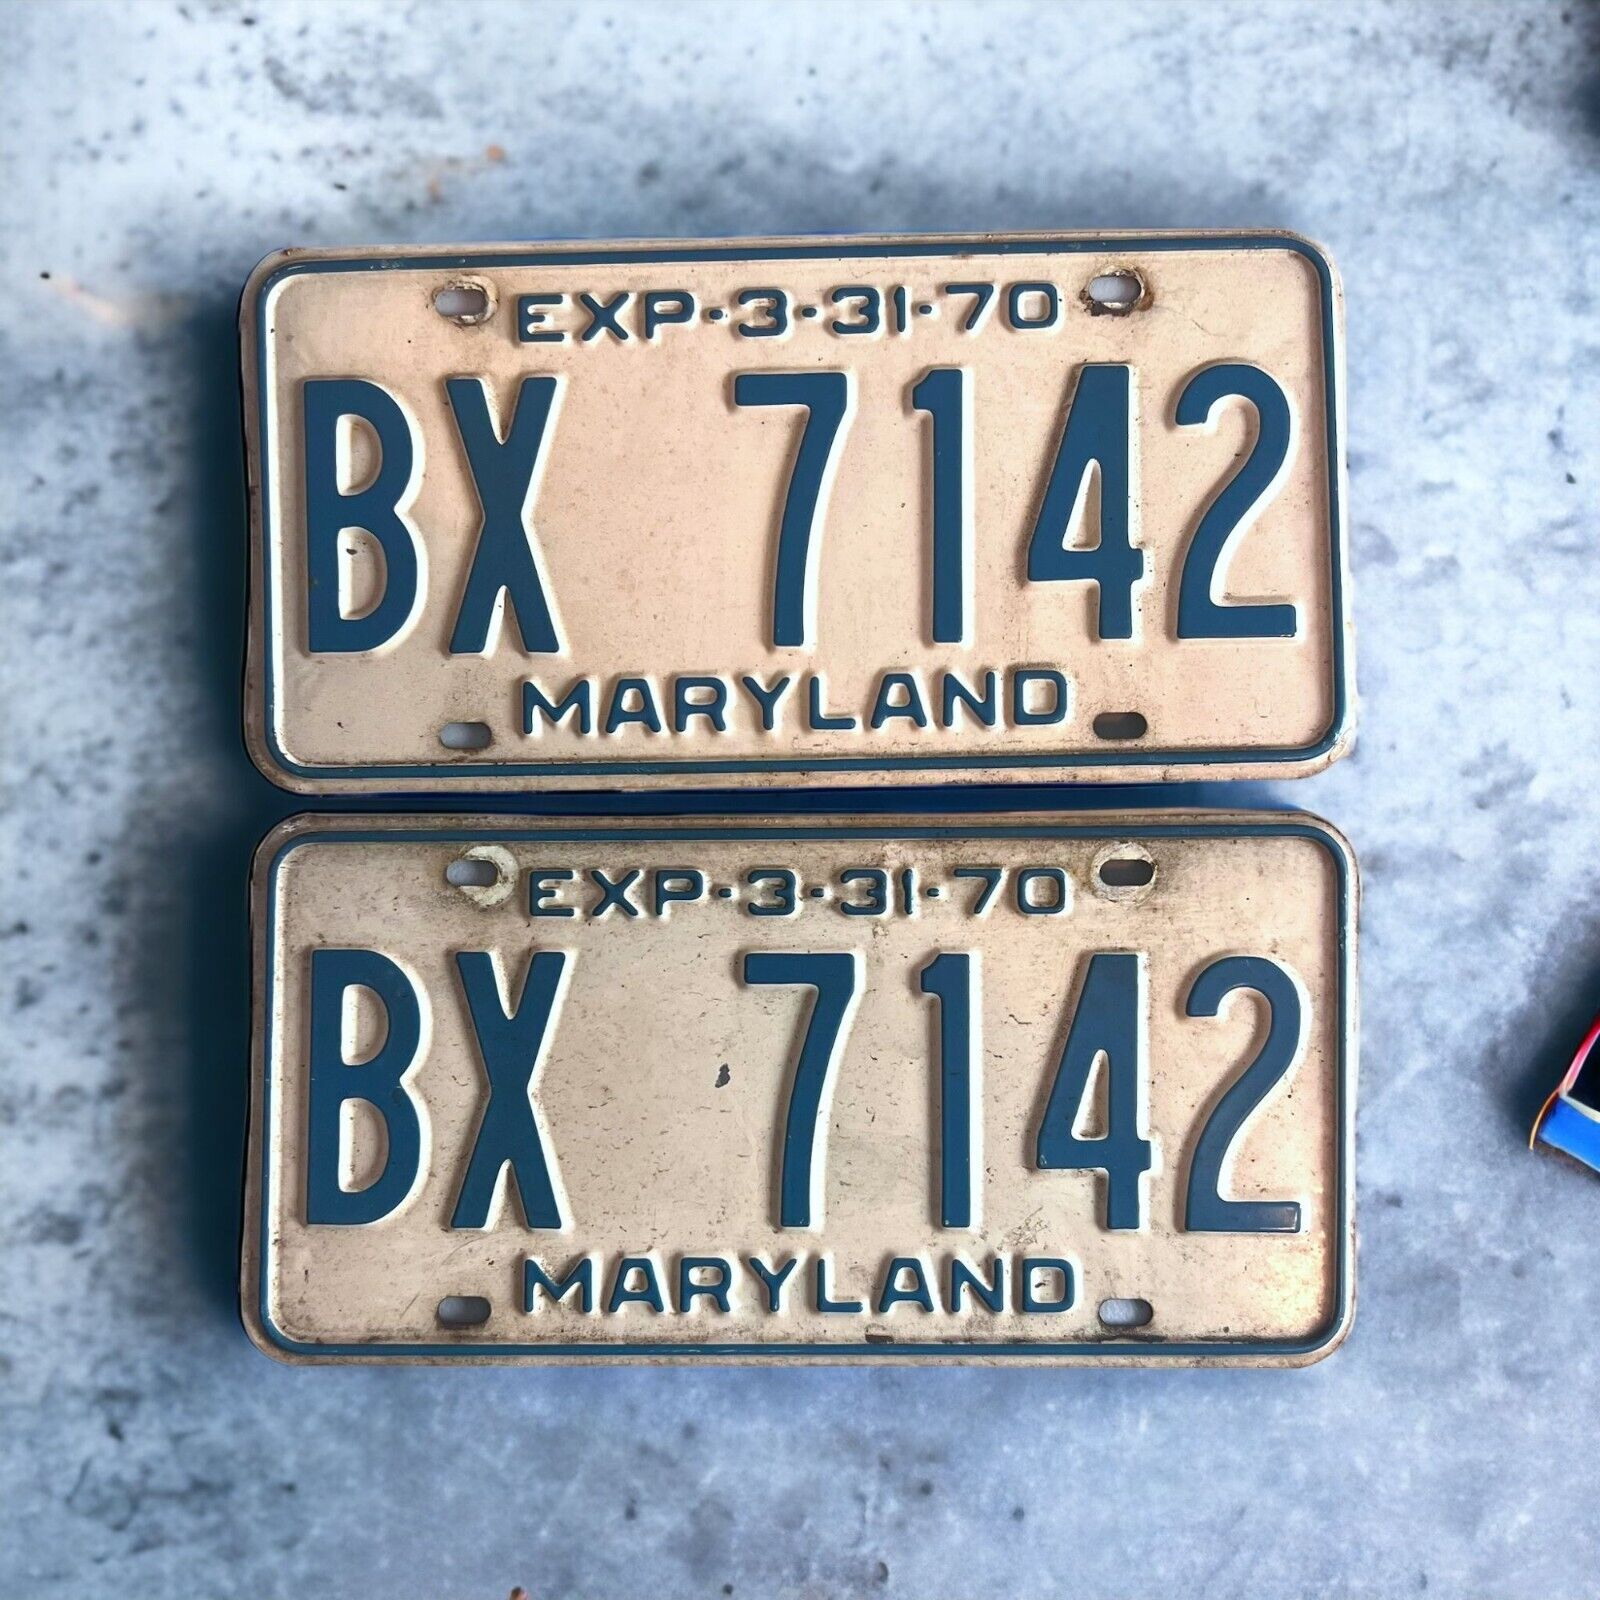 Vintage 1970 Maryland License Plate Pair BX 7142 Expiration 3-31-70